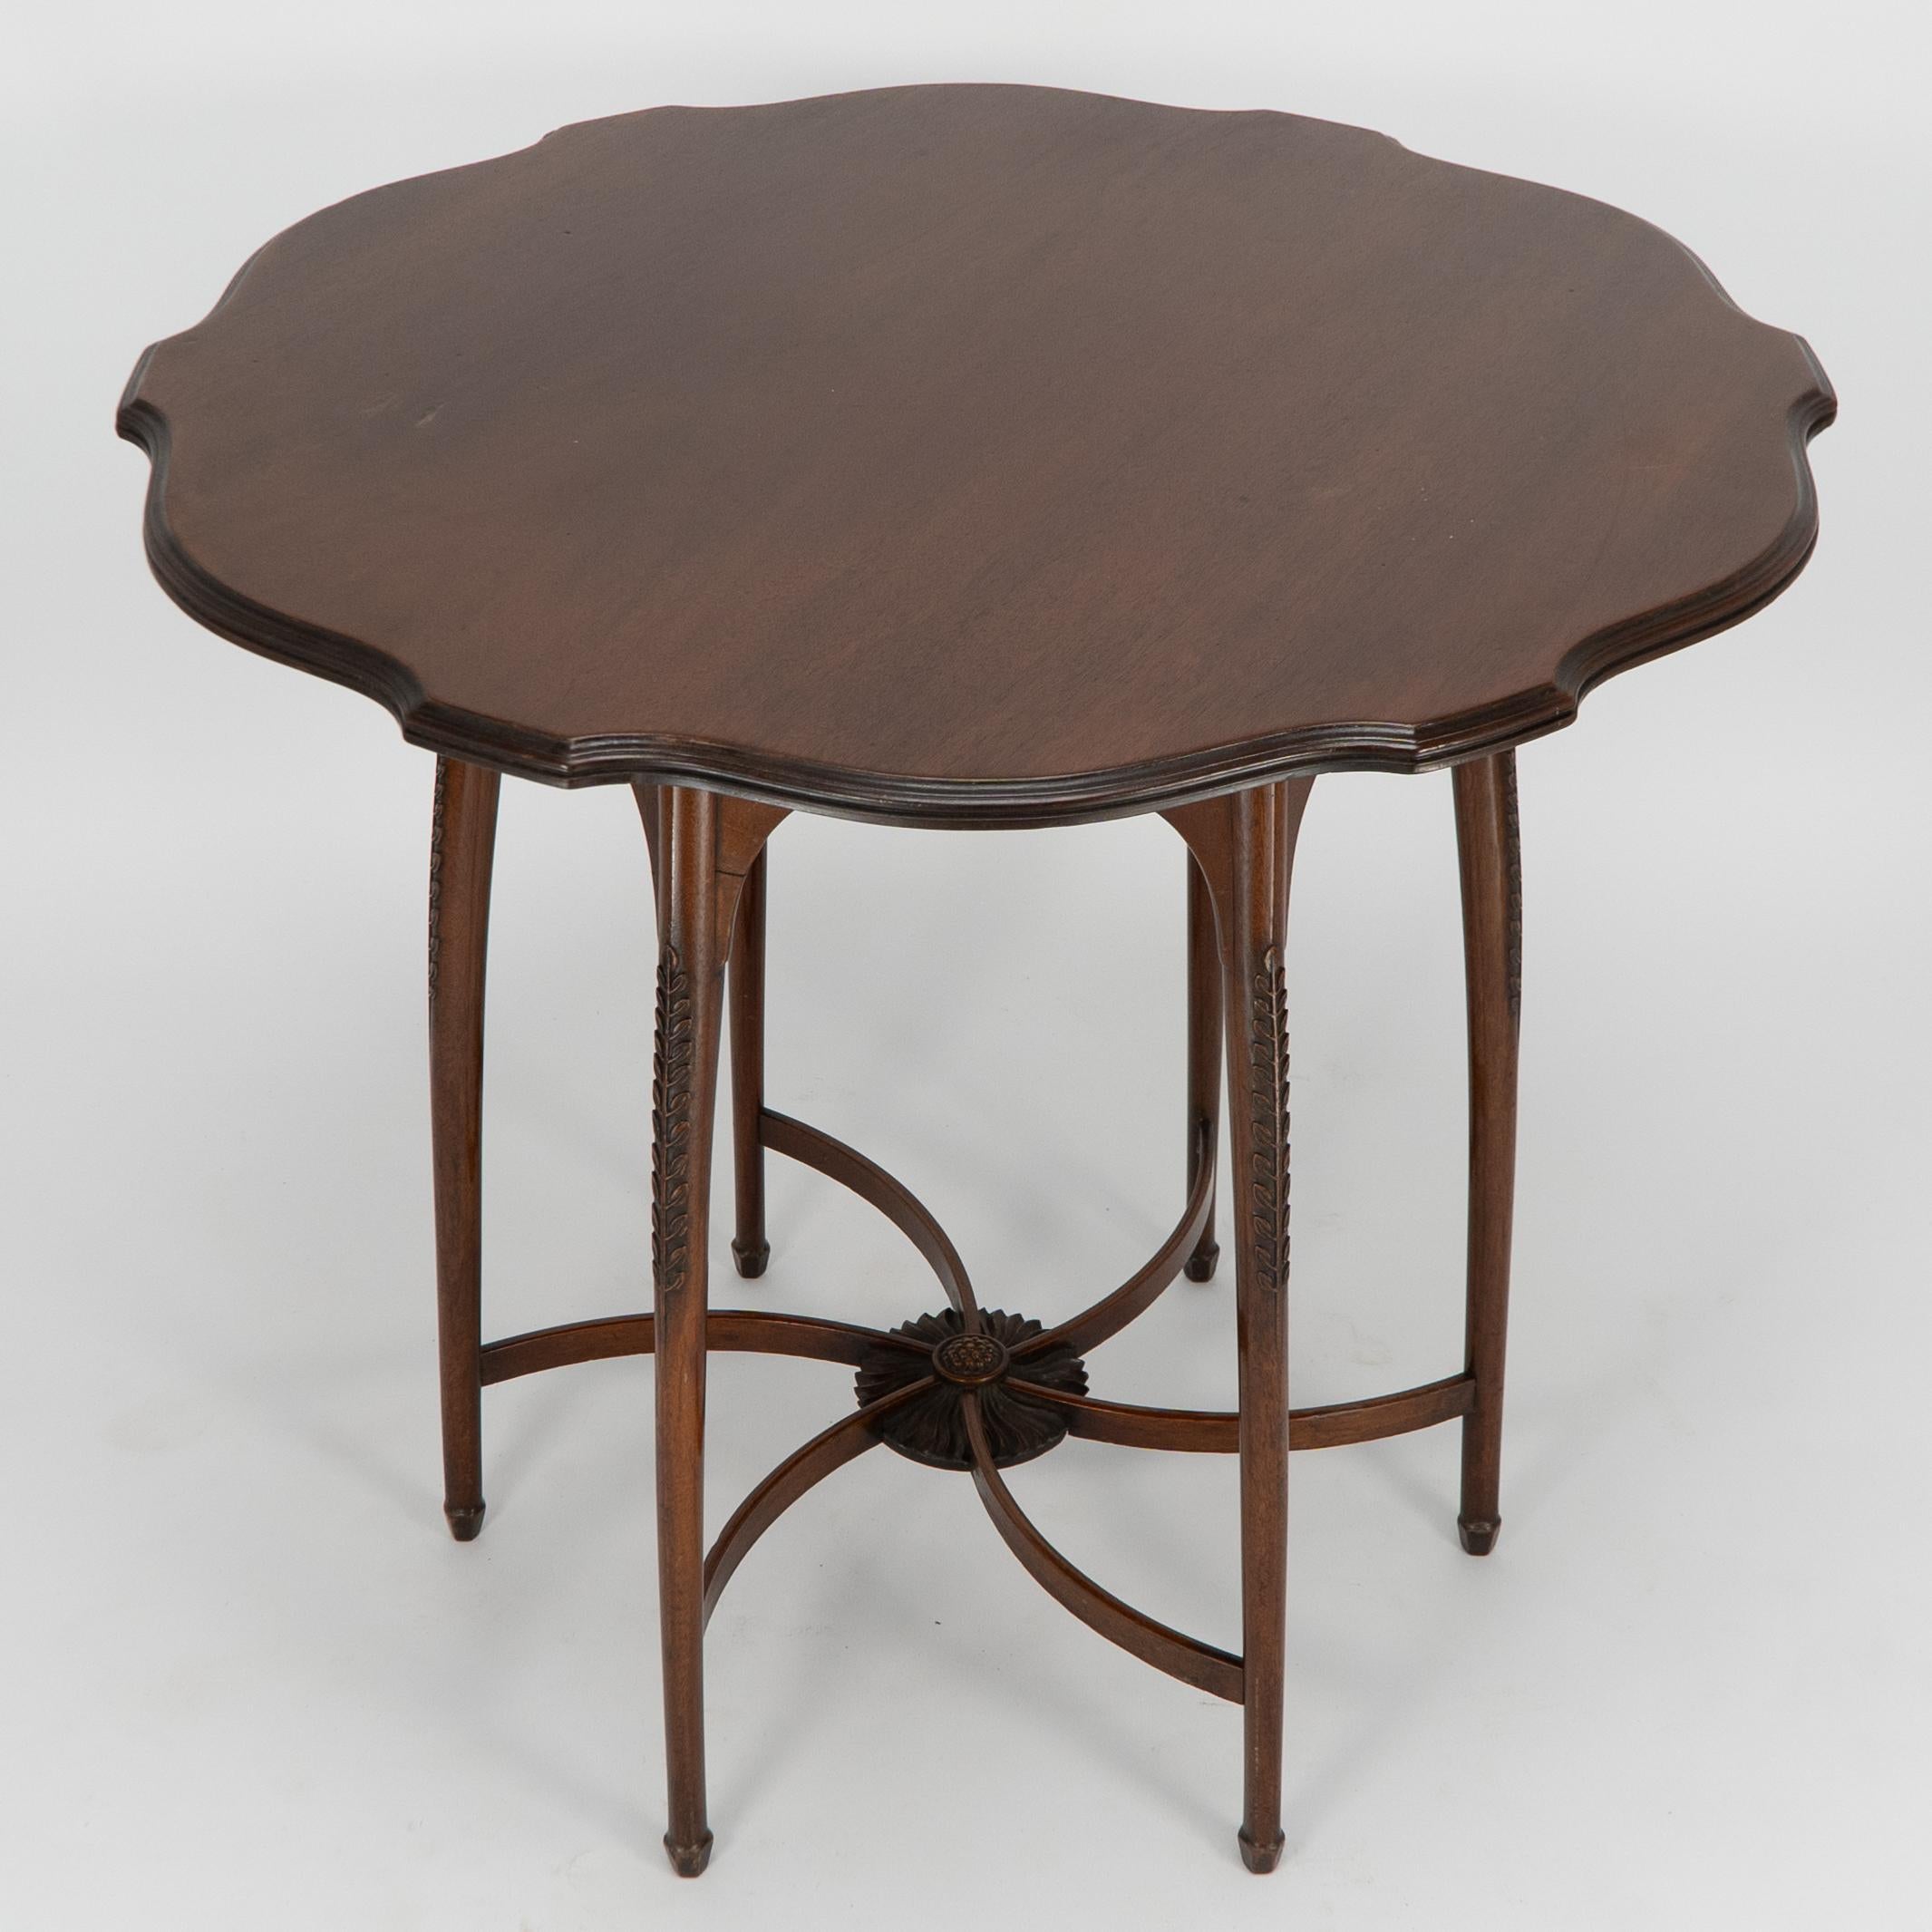 Late 19th Century George Jack for Morris and Co. A high Aesthetic Movement circular side table For Sale